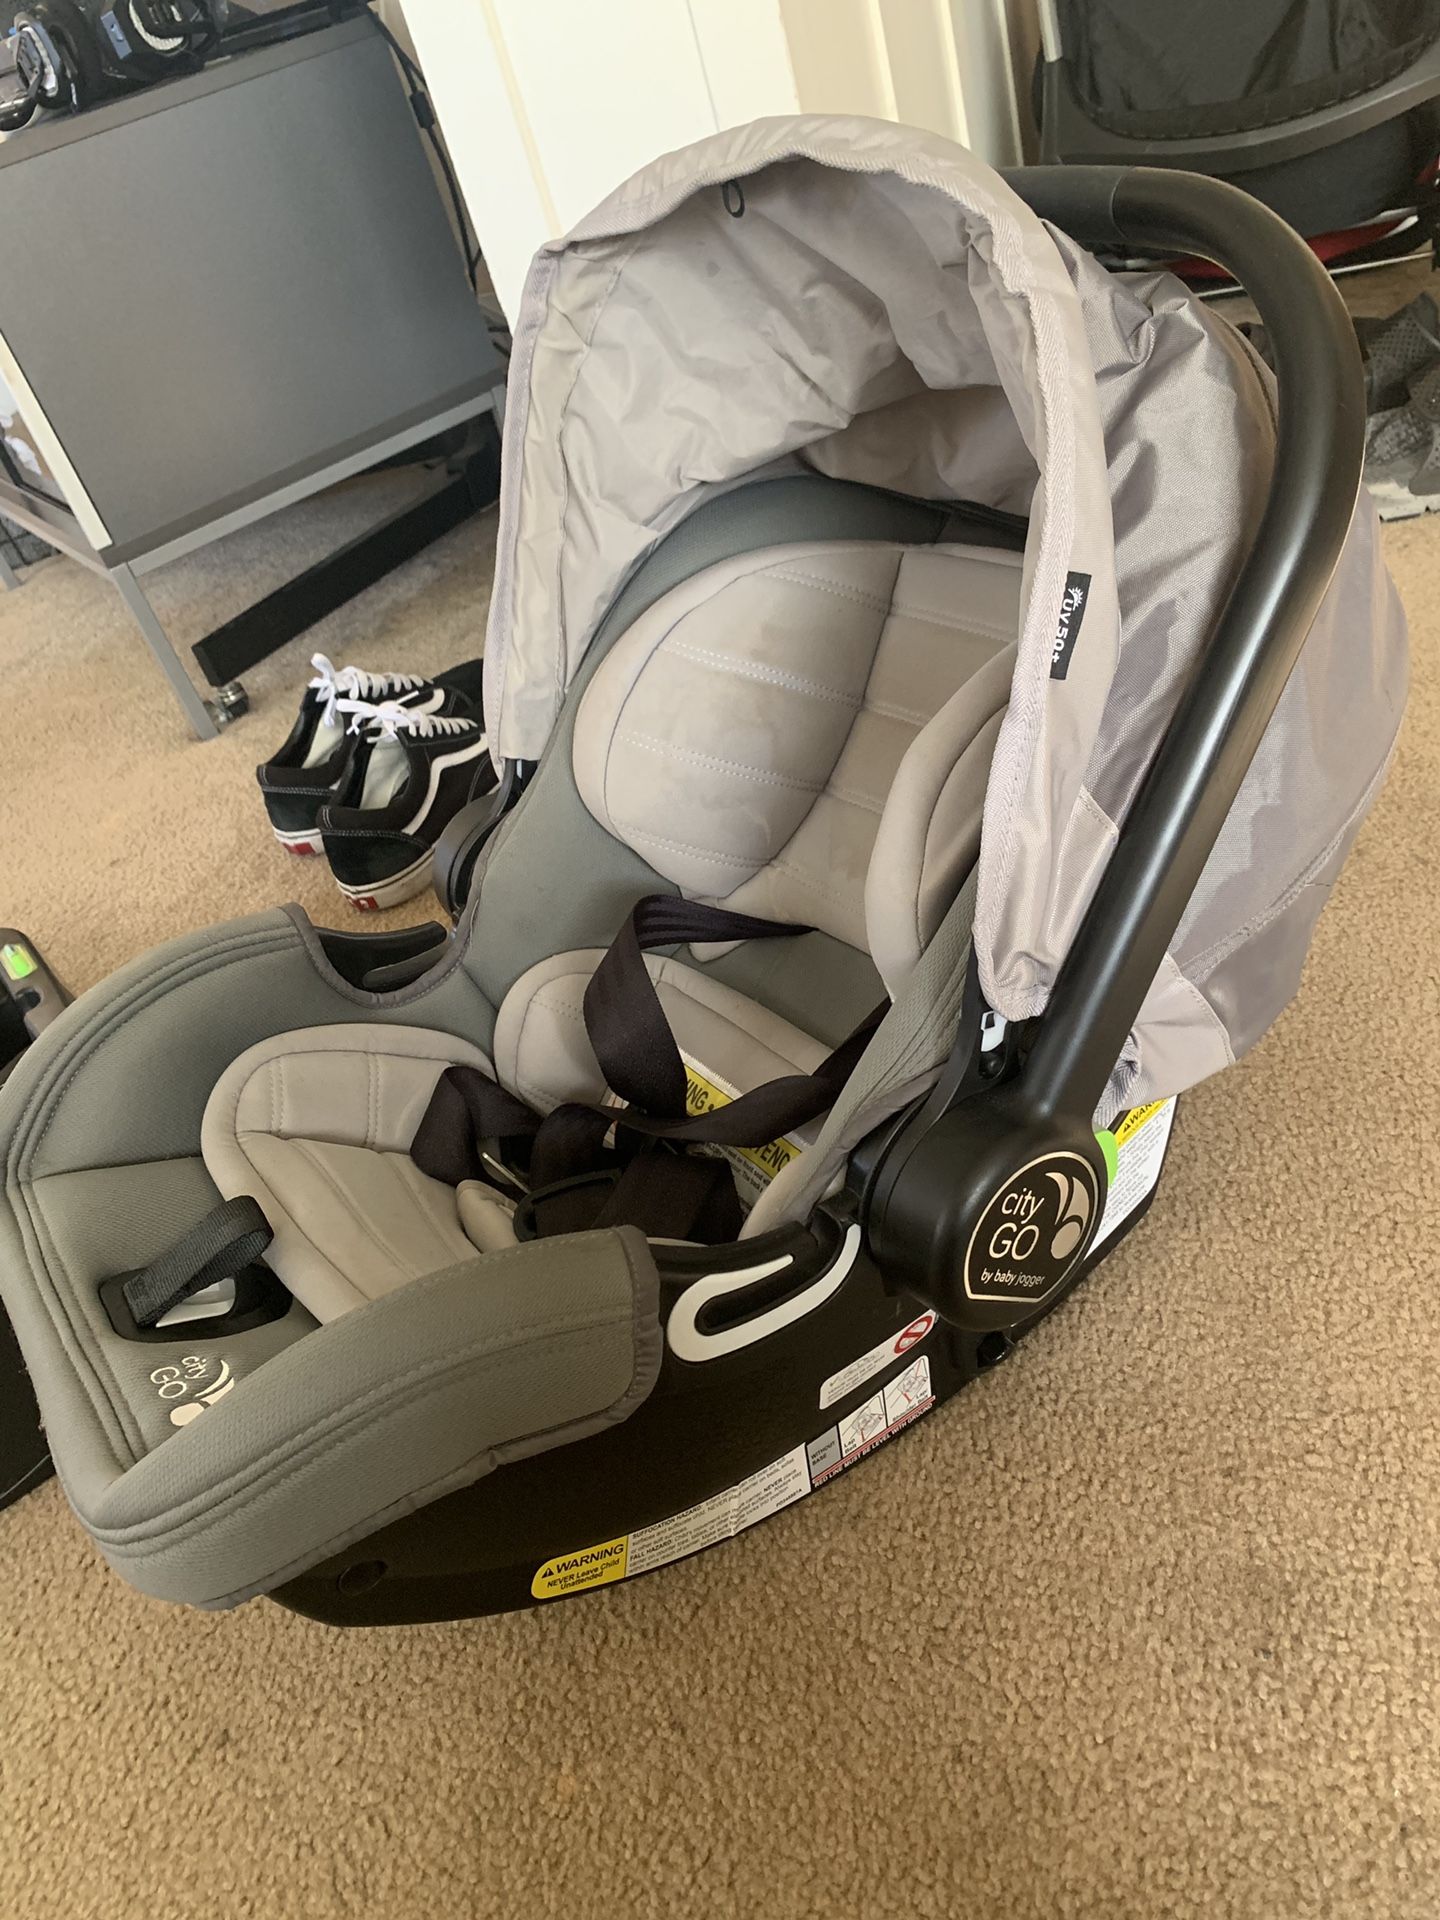 City Go by baby jogger car seat